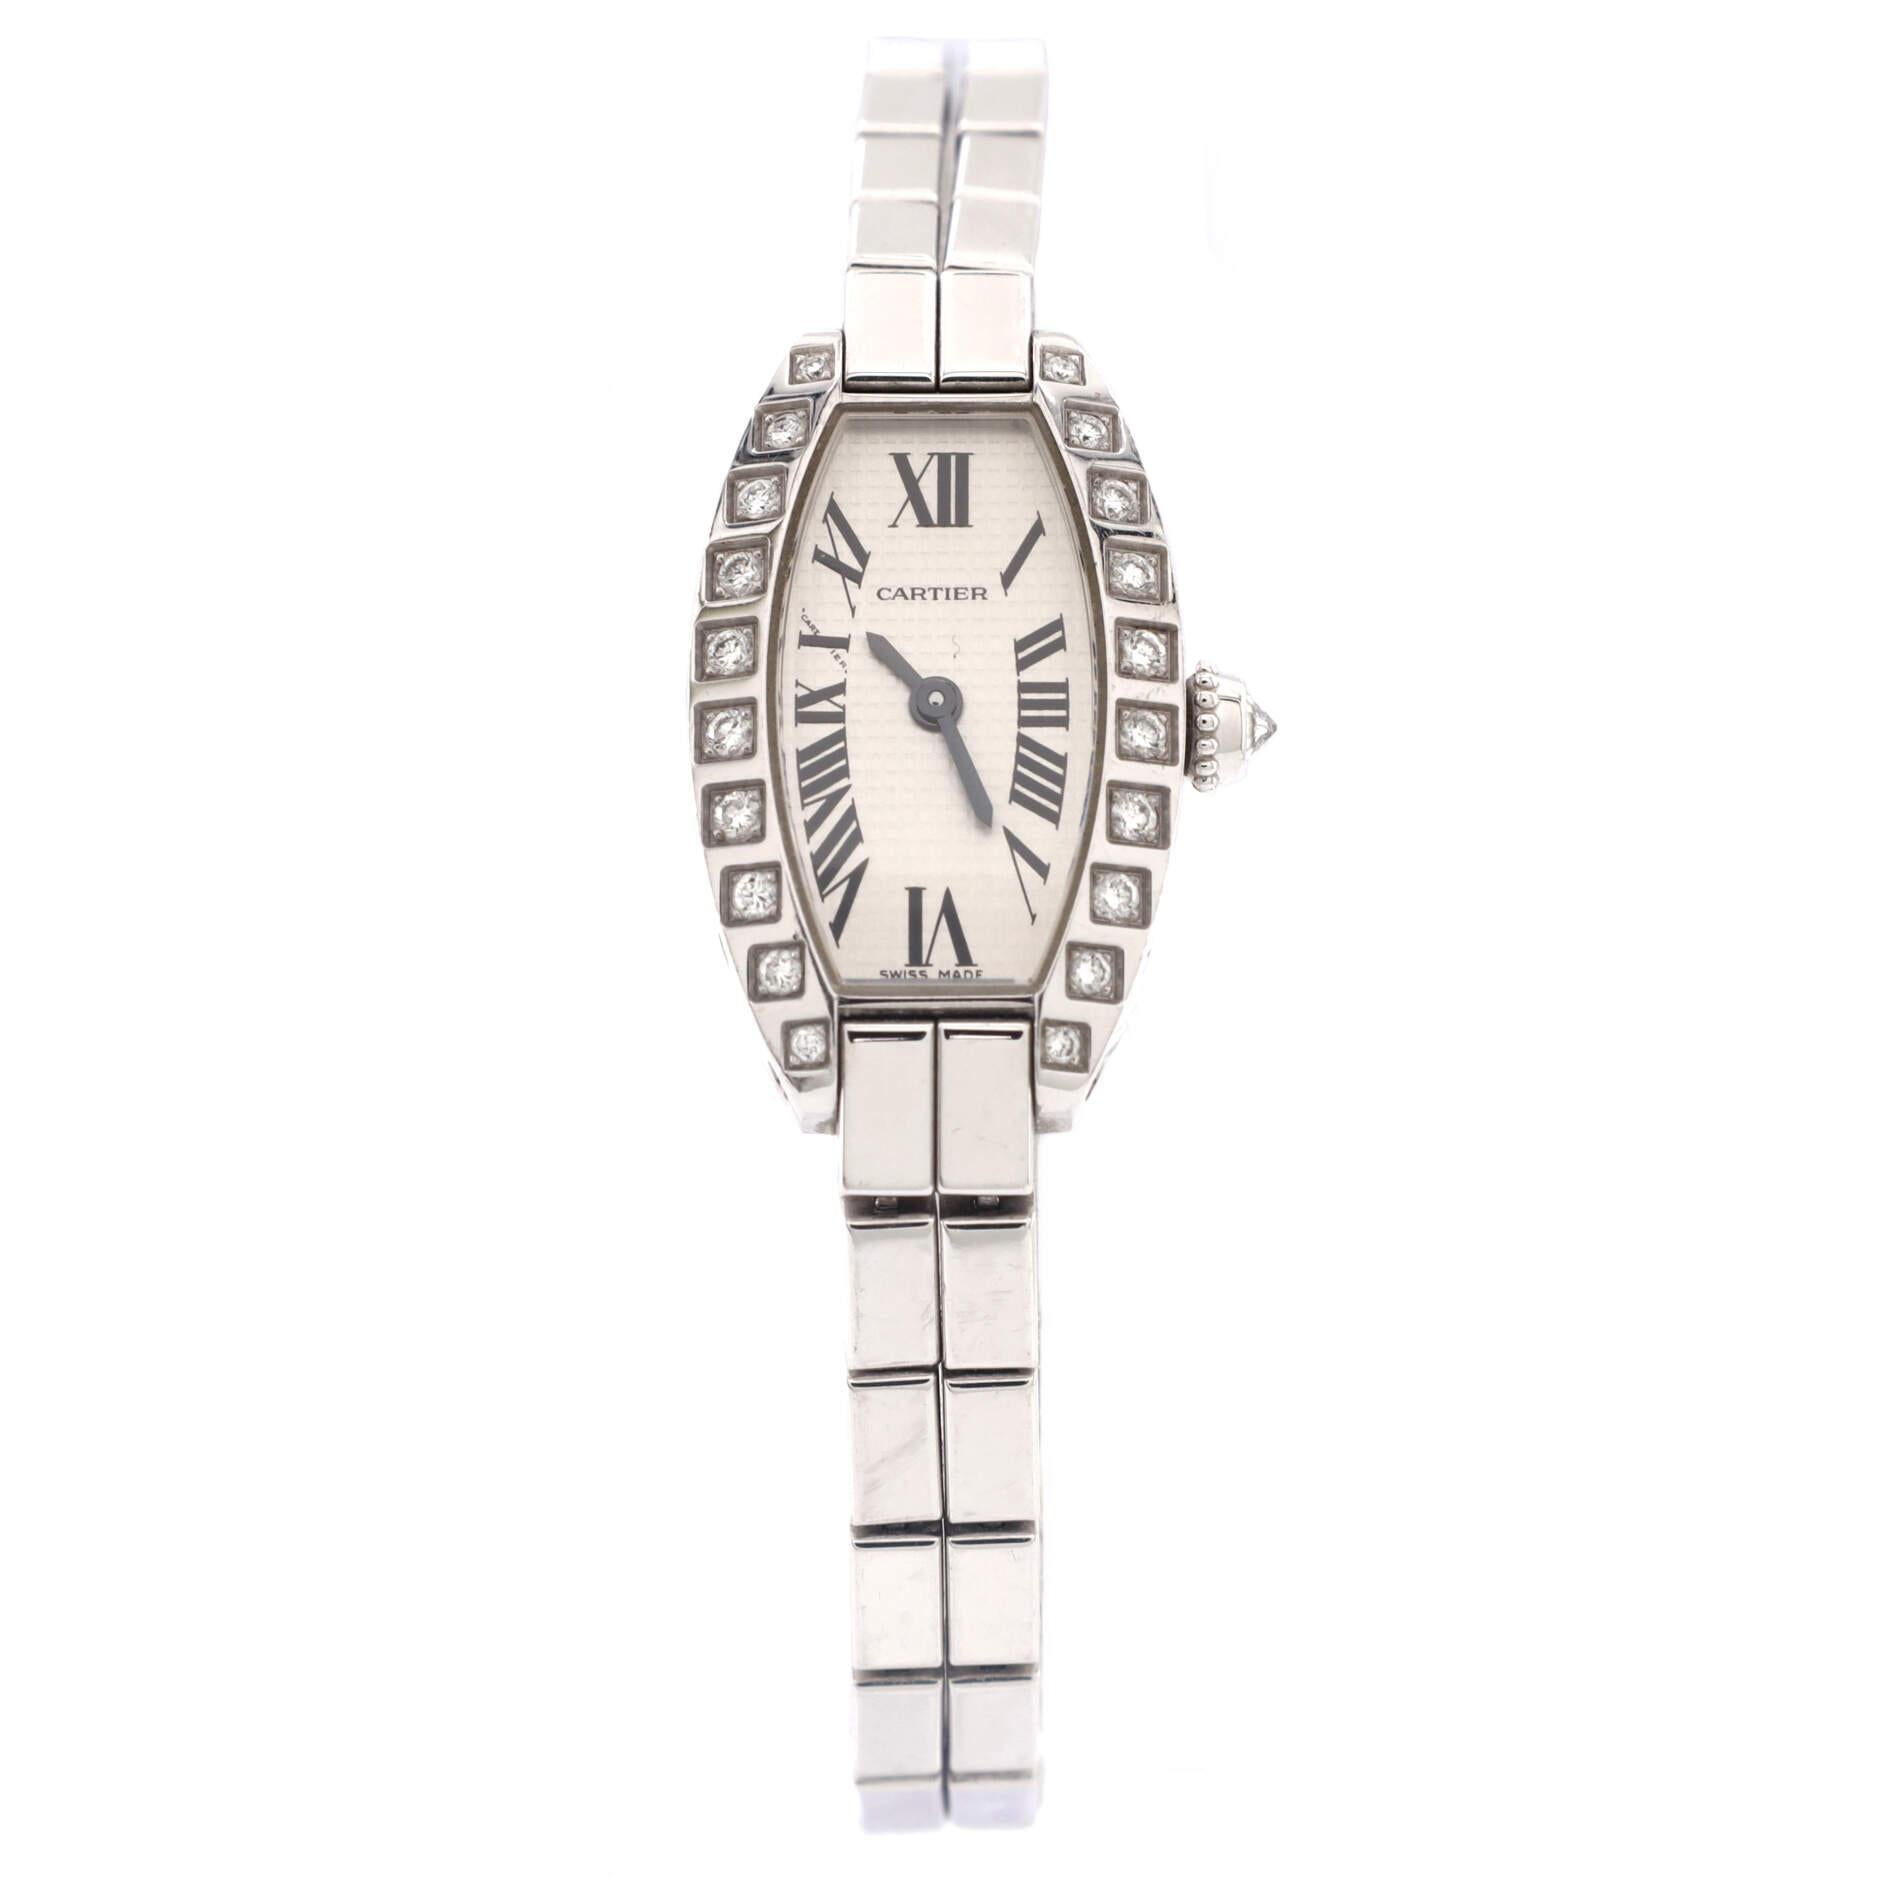 Condition: Good. Heavy scratches and wear throughout. Wear and scratches on case and bracelet.
Accessories: No Accessories
Measurements: Case Size/Width: 16mm, Watch Height: 6mm, Band Width: 6mm, Wrist circumference: 6.5